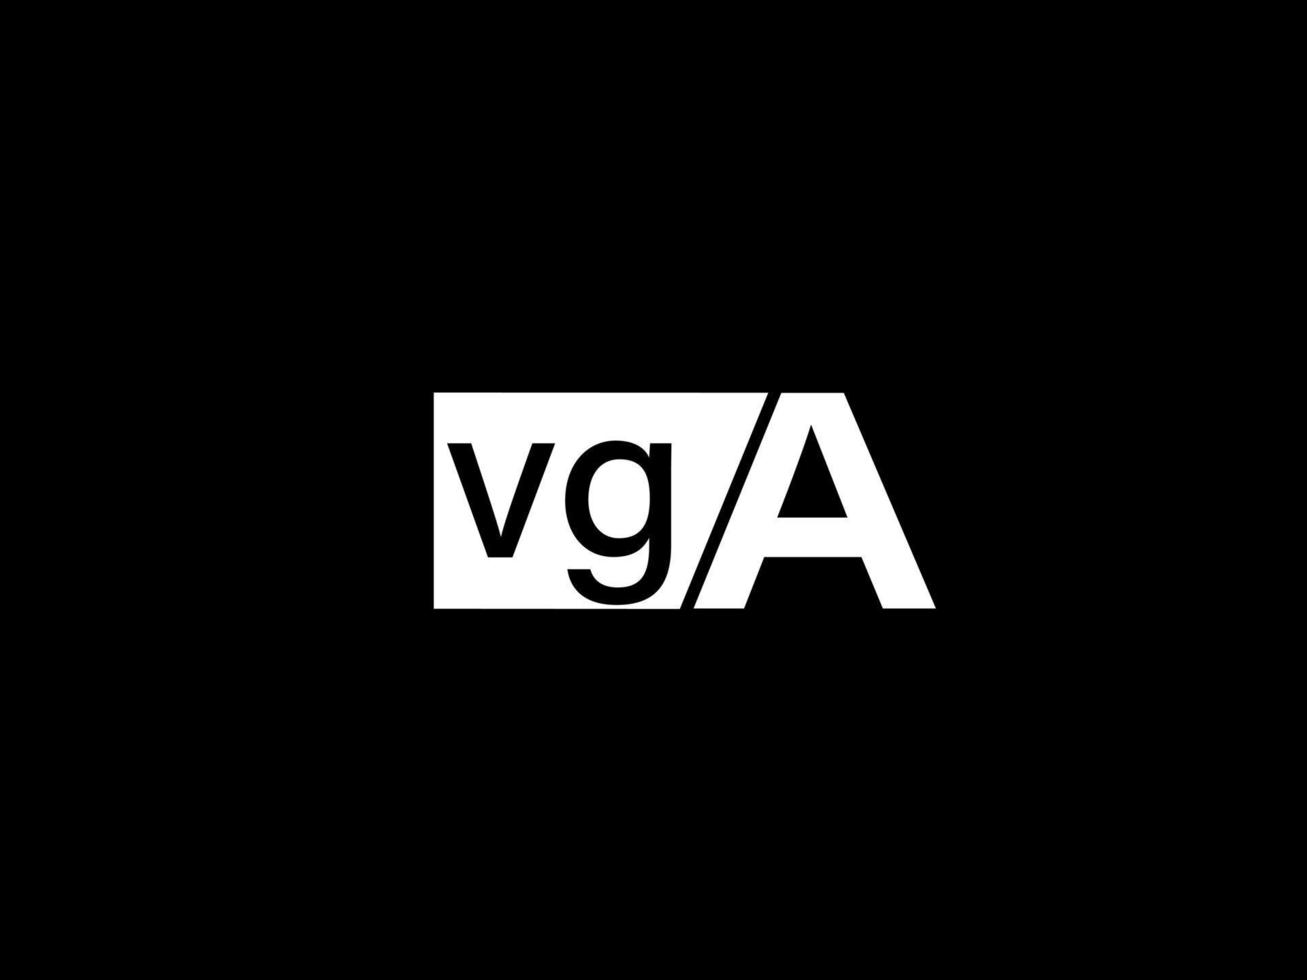 VGA Logo and Graphics design vector art, Icons isolated on black background